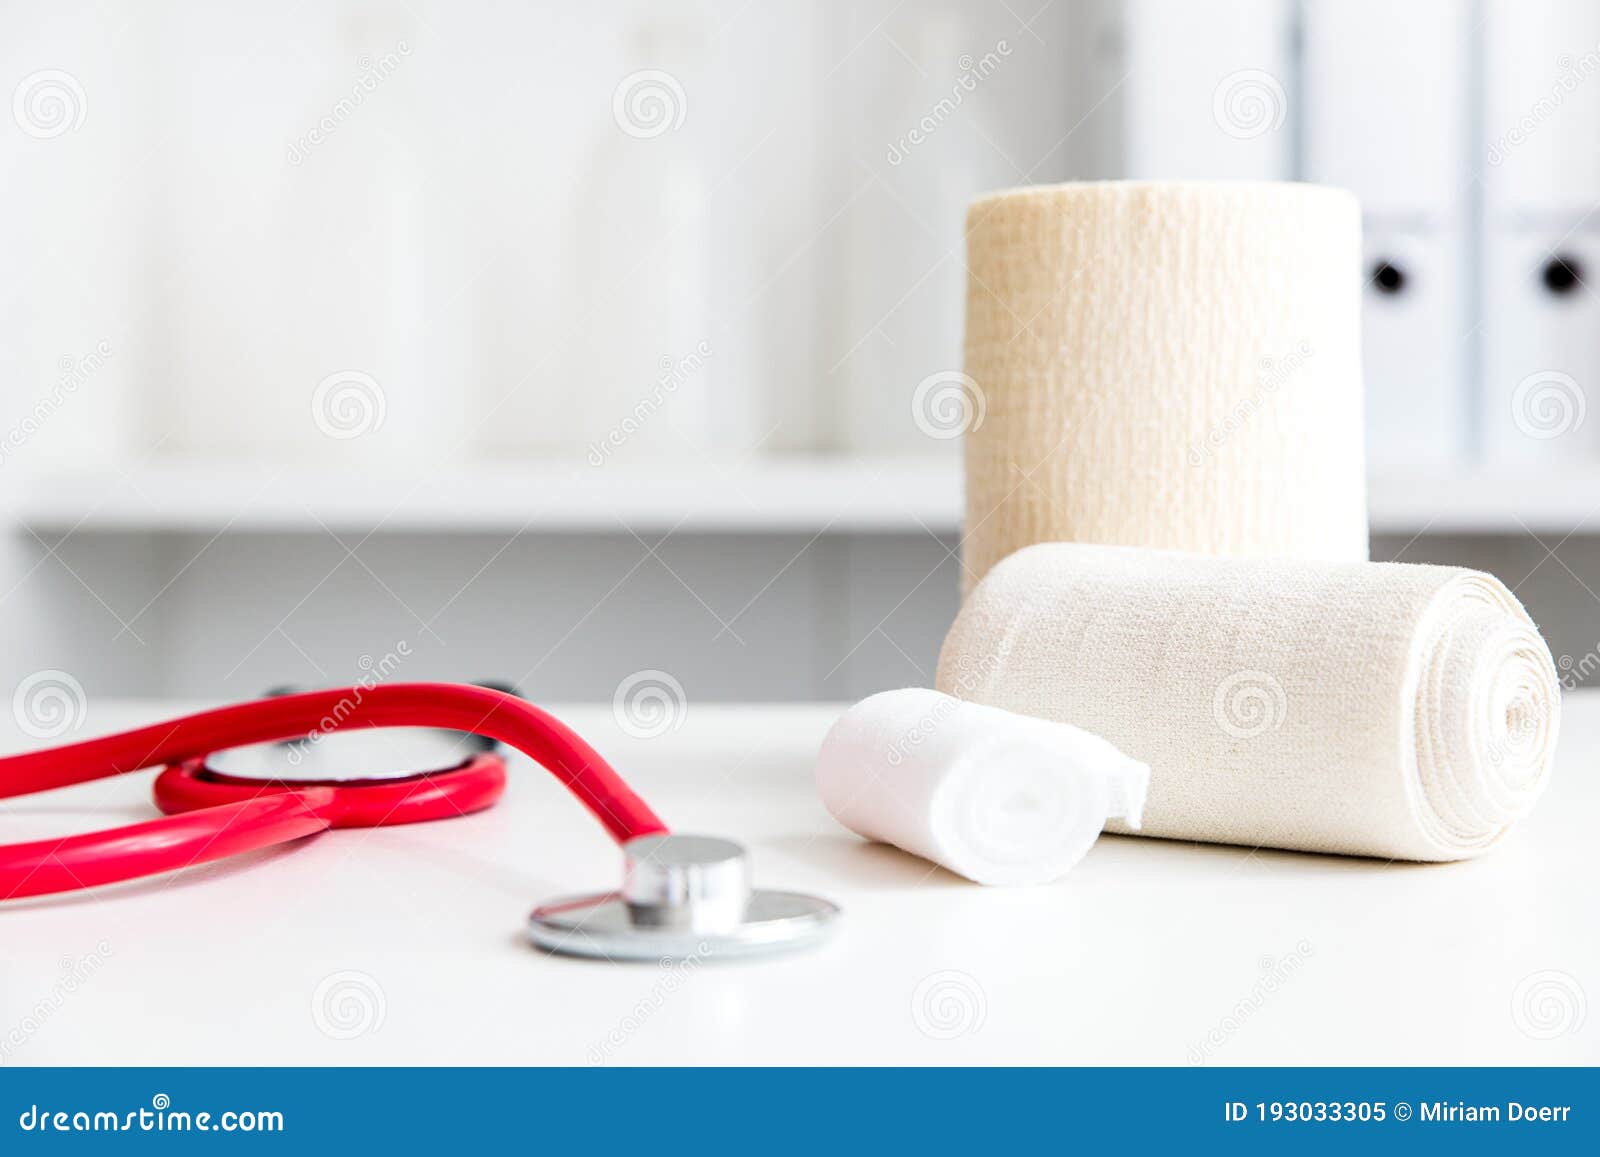 workspace or workplace in a doctorÃÂ´s office with bandages and a stethoscope